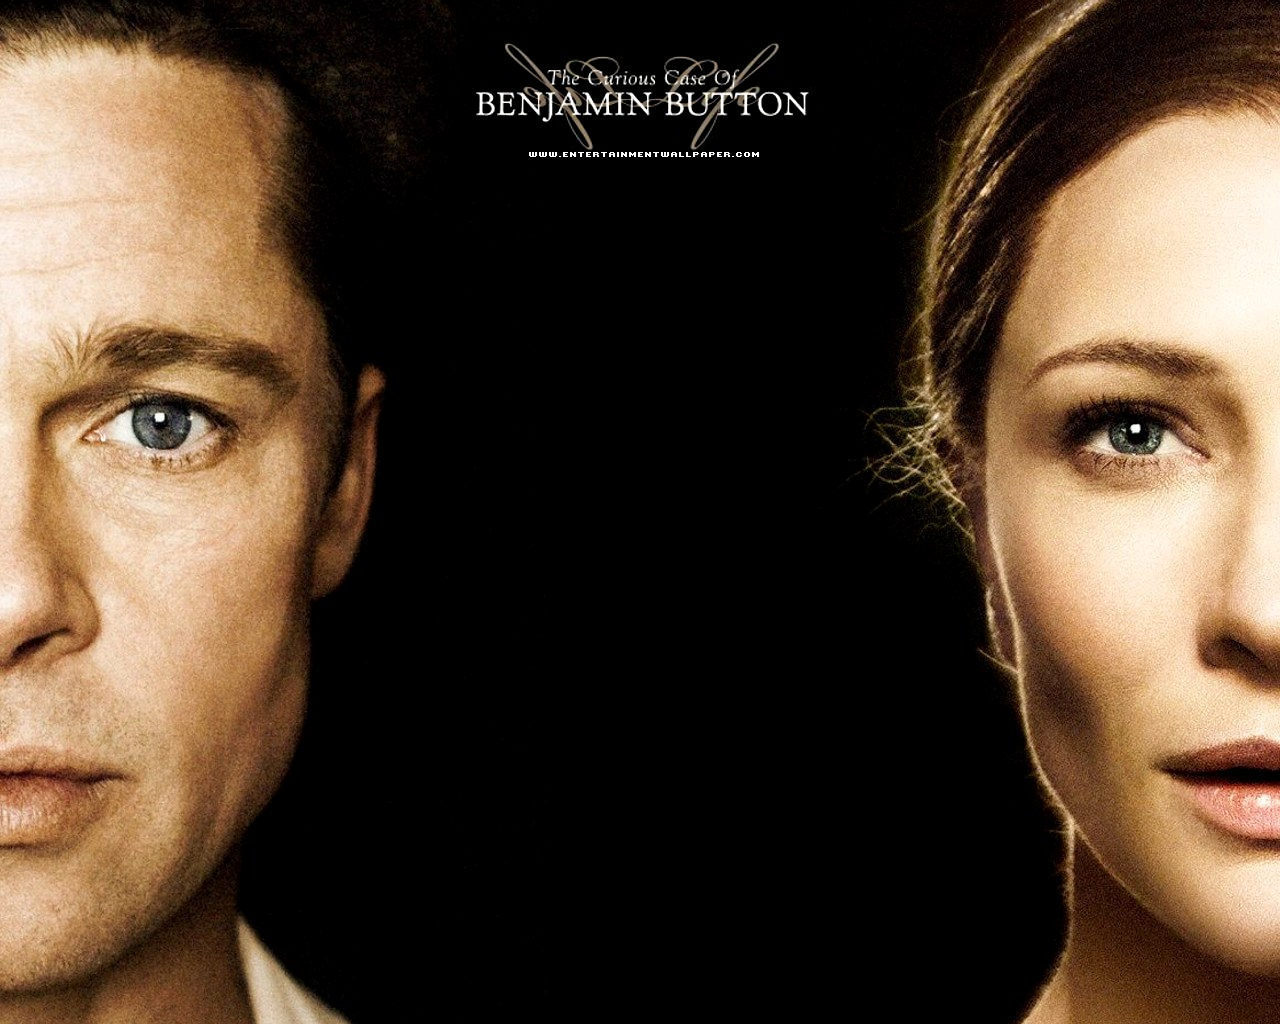 Benjamin Button and Daisy Wallpaper - The Curious Case of 1280x1024